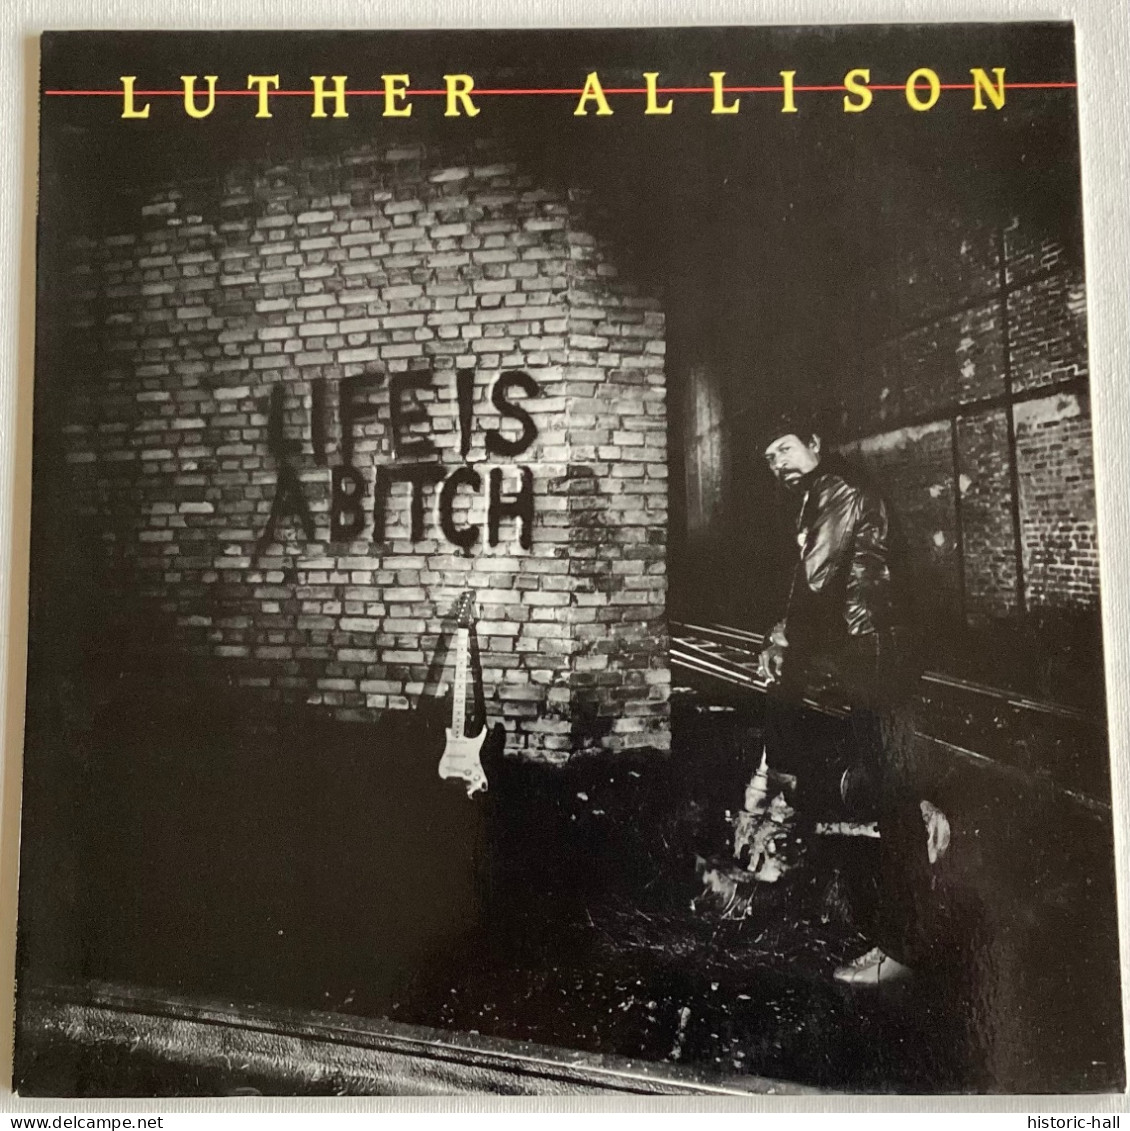 LUTHER ALLISON - Life Is A Bitch - LP - 1984 - French Press - Blues